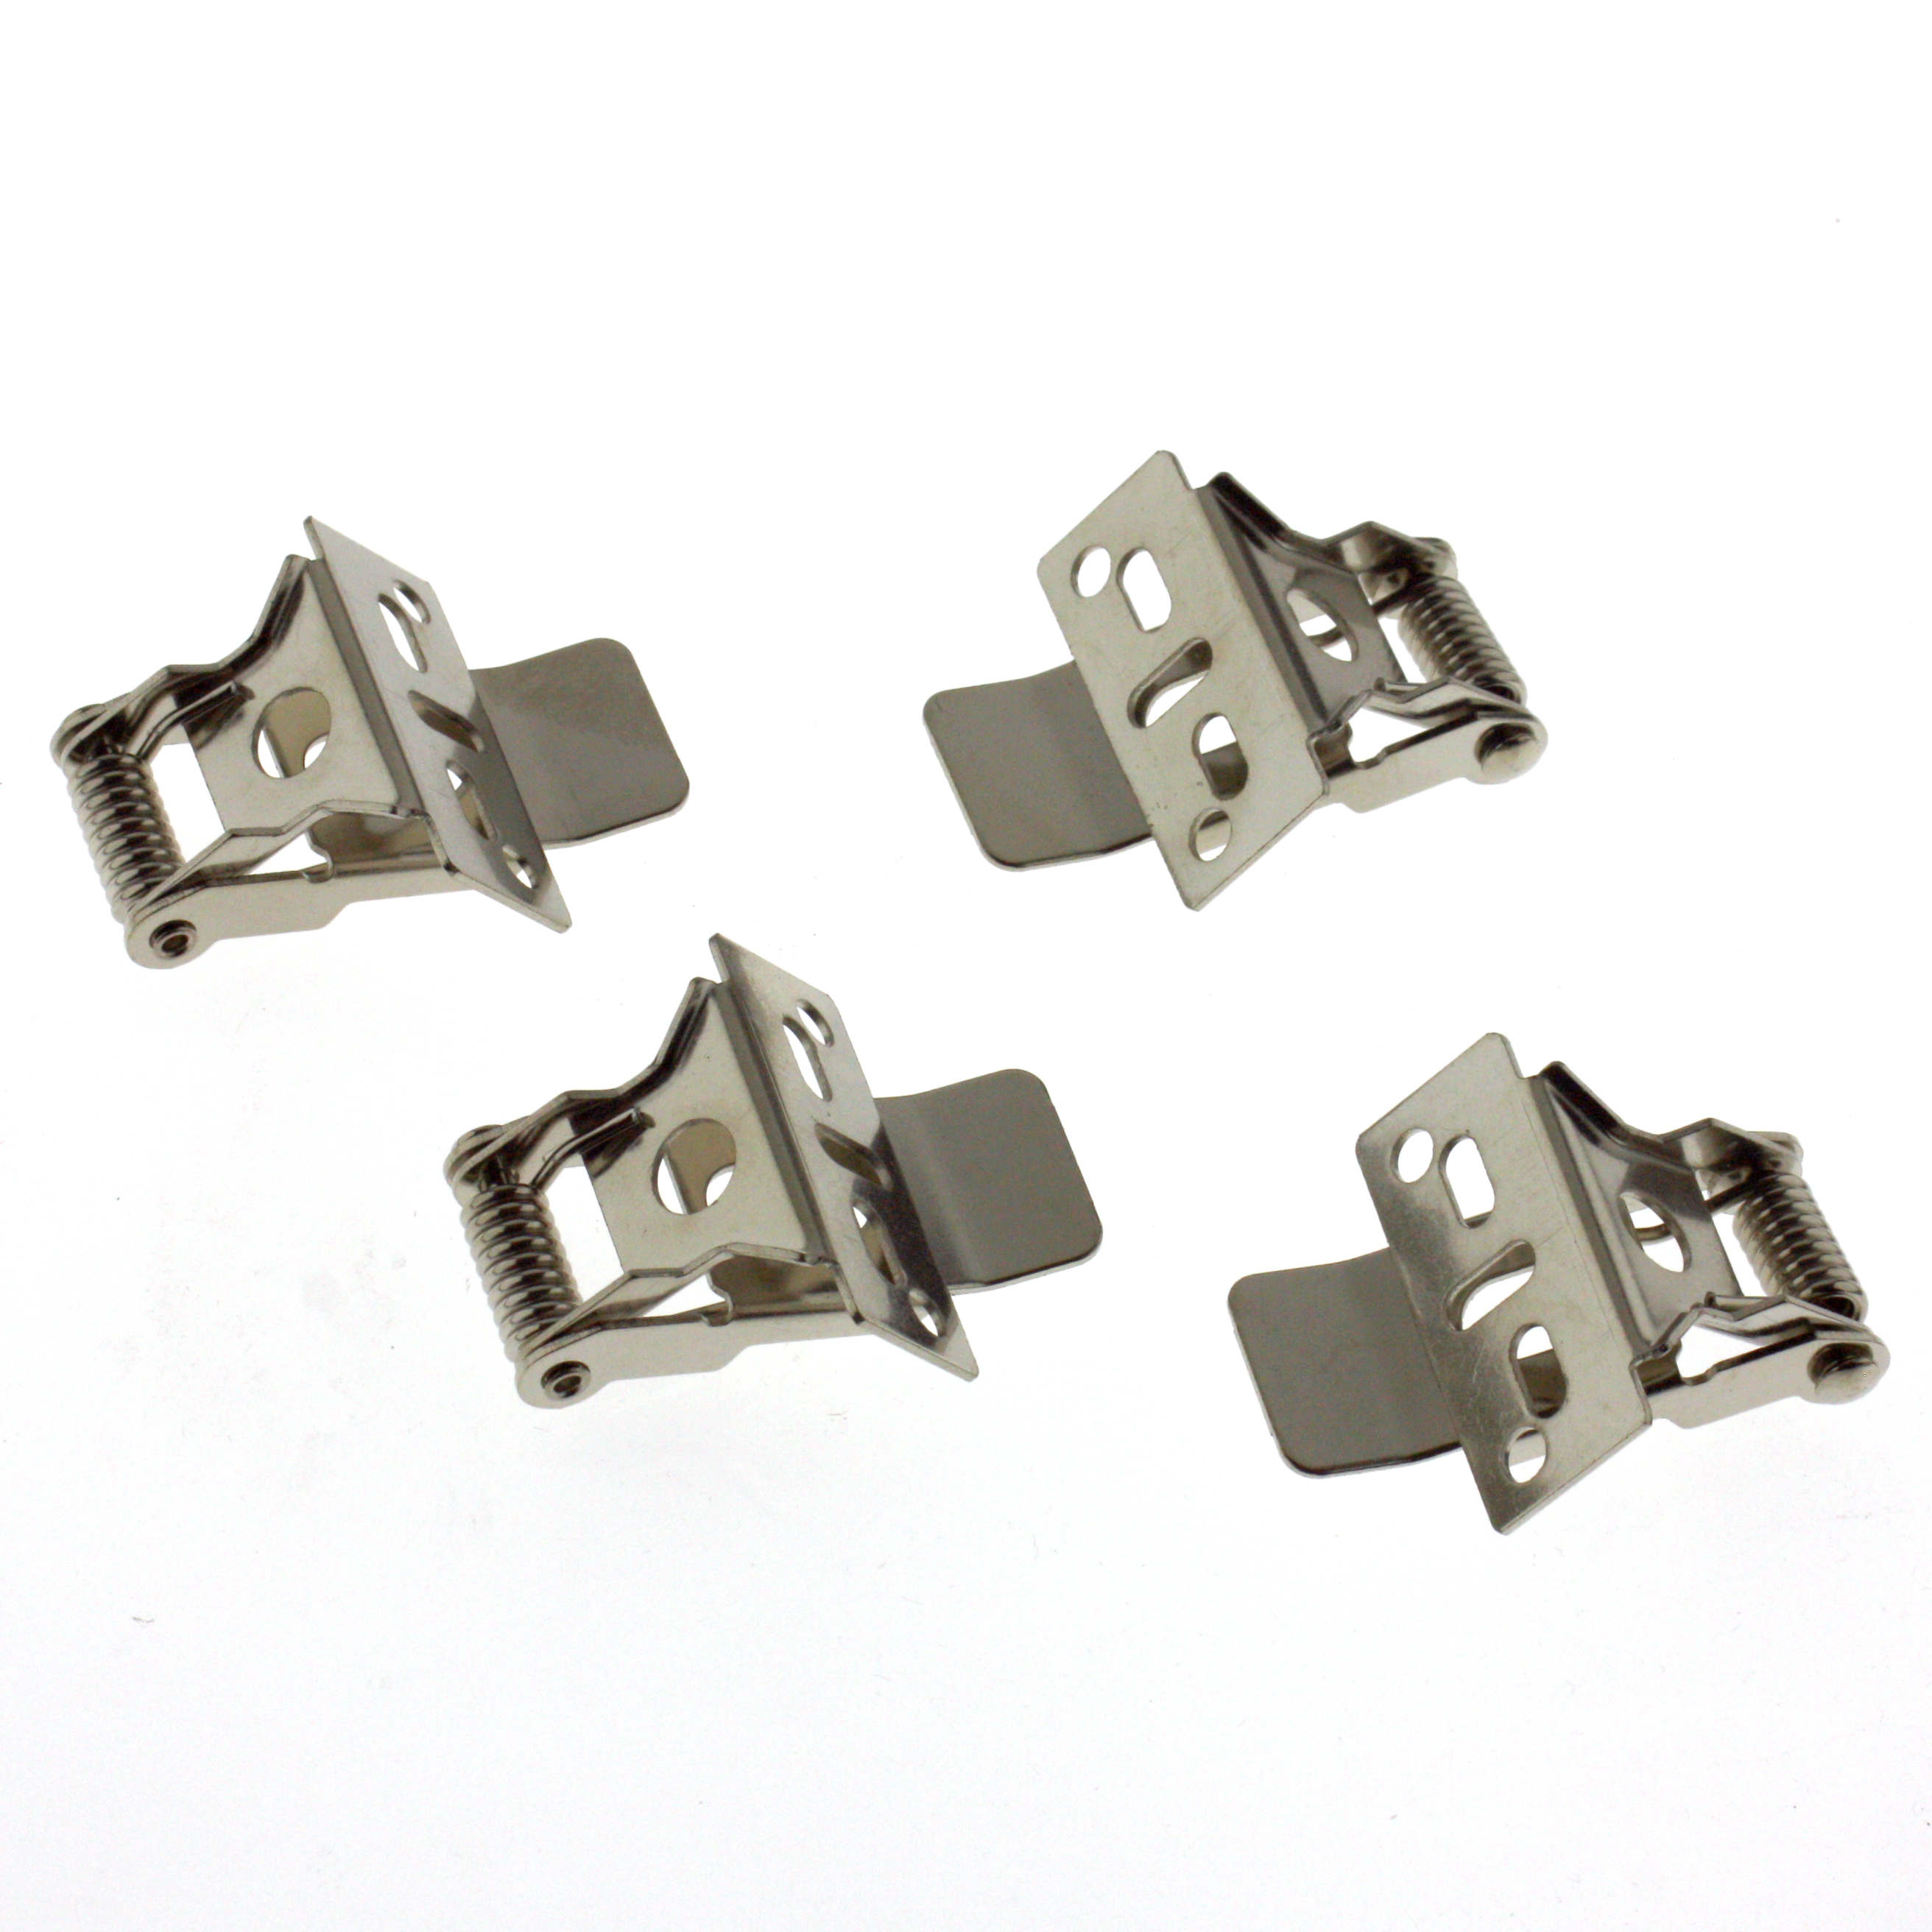 Mounting clips for led panels (4 pcs.)